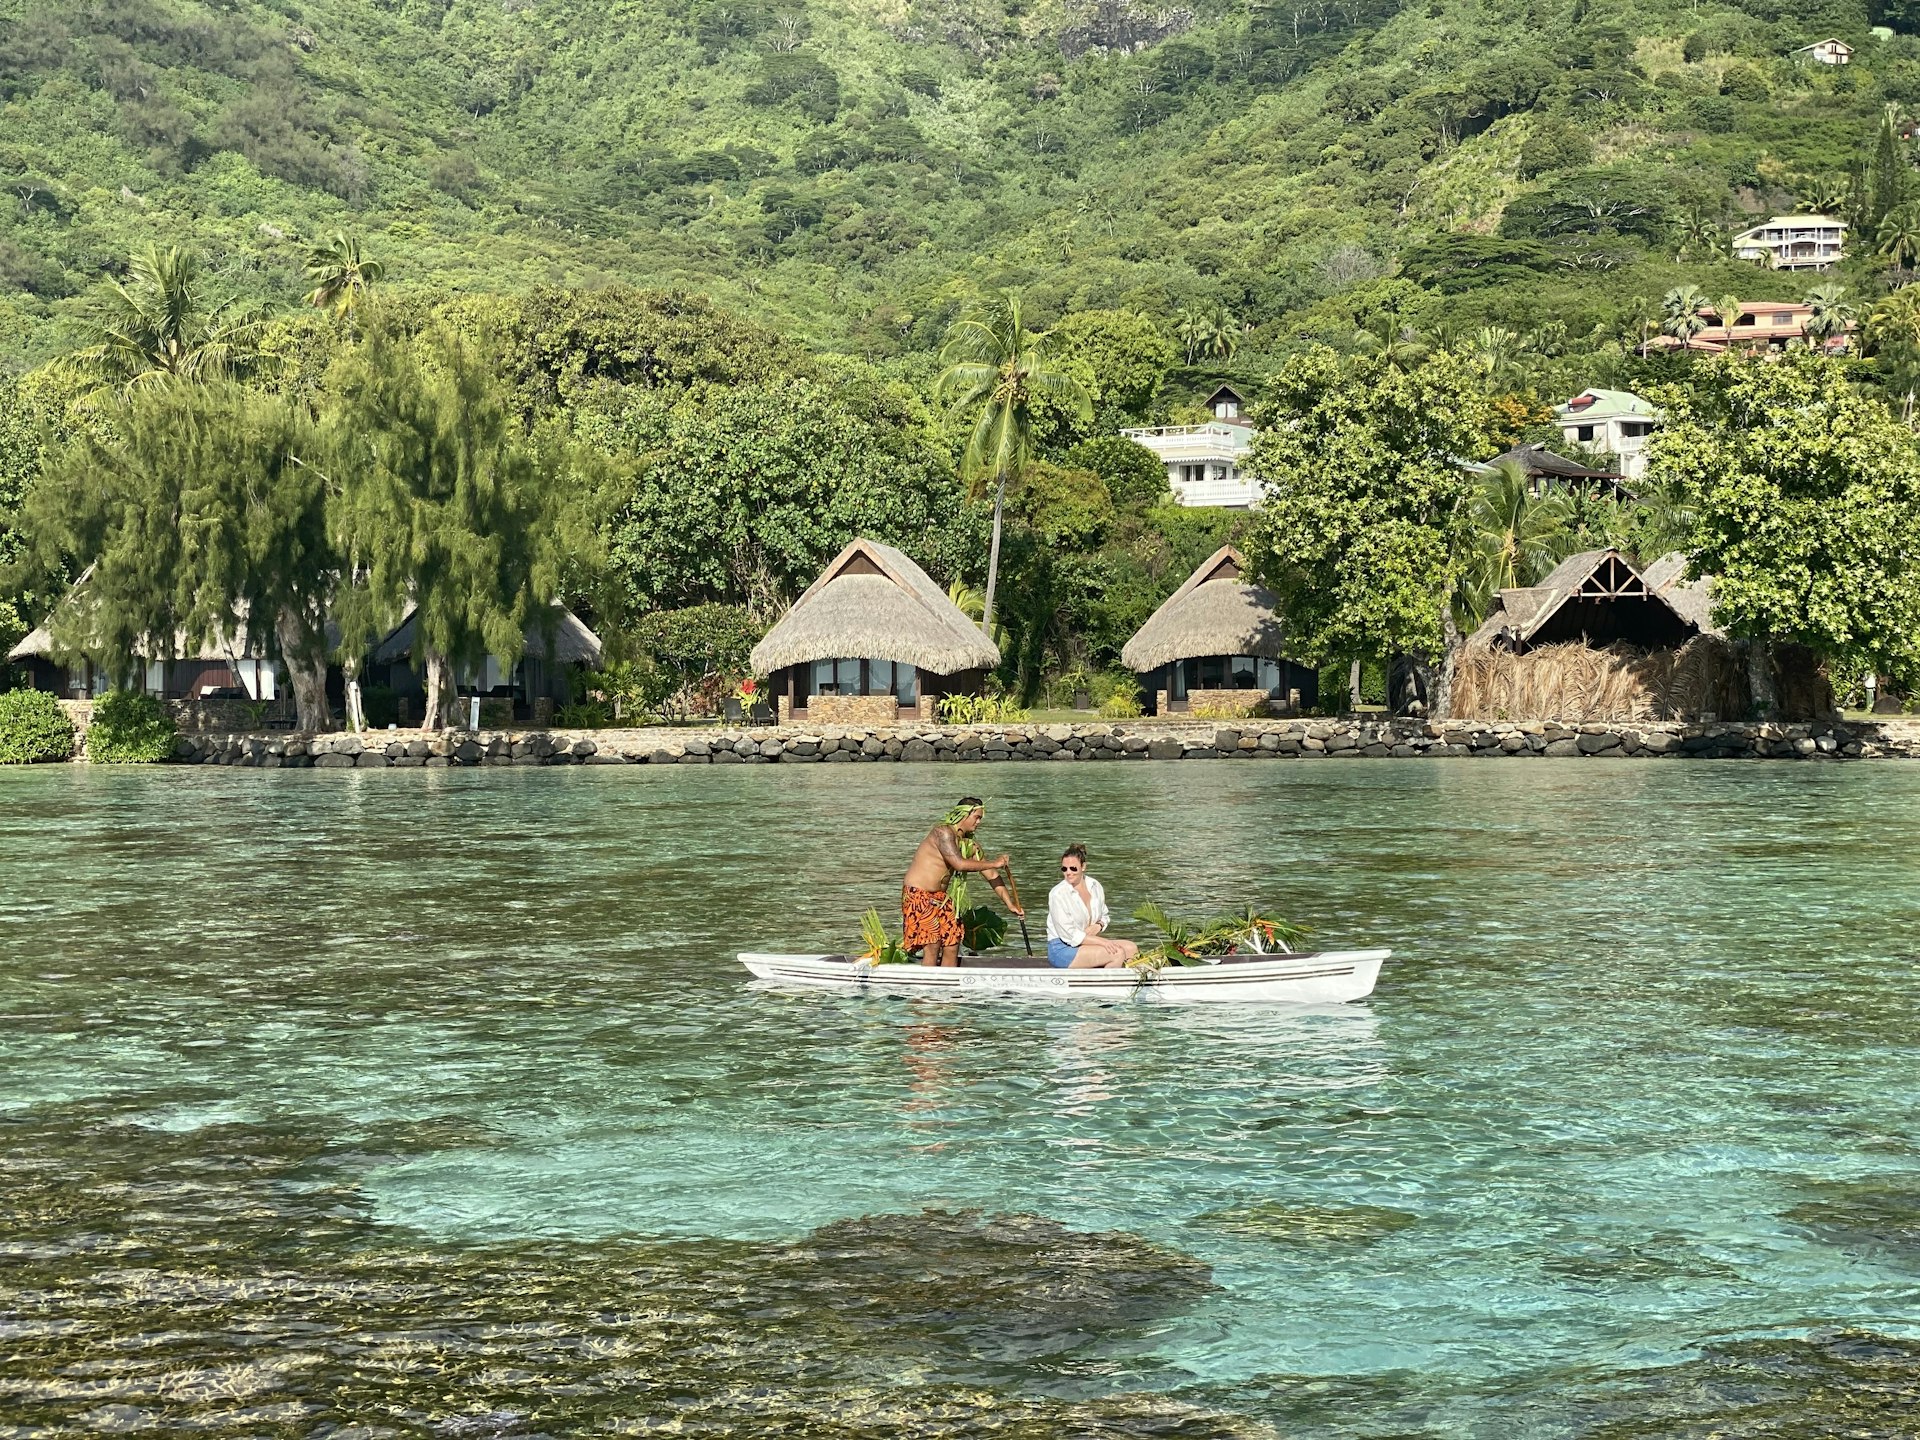 Taking a boat ride outside the resort's reef to explore the vibrant ocean life of French Polynesia